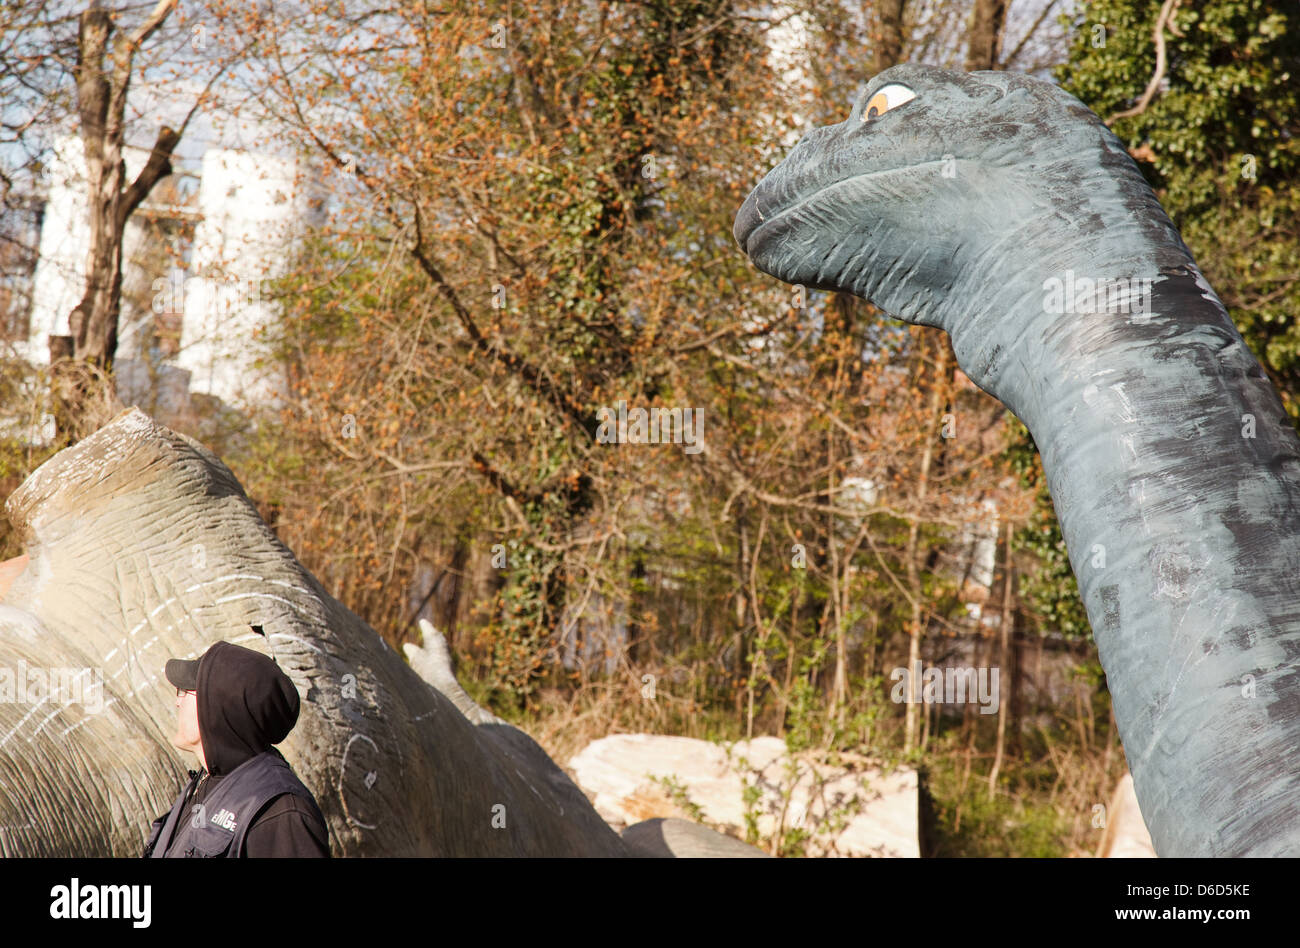 Berlin, Germany, a dinosaur in an abandoned amusement park Stock Photo